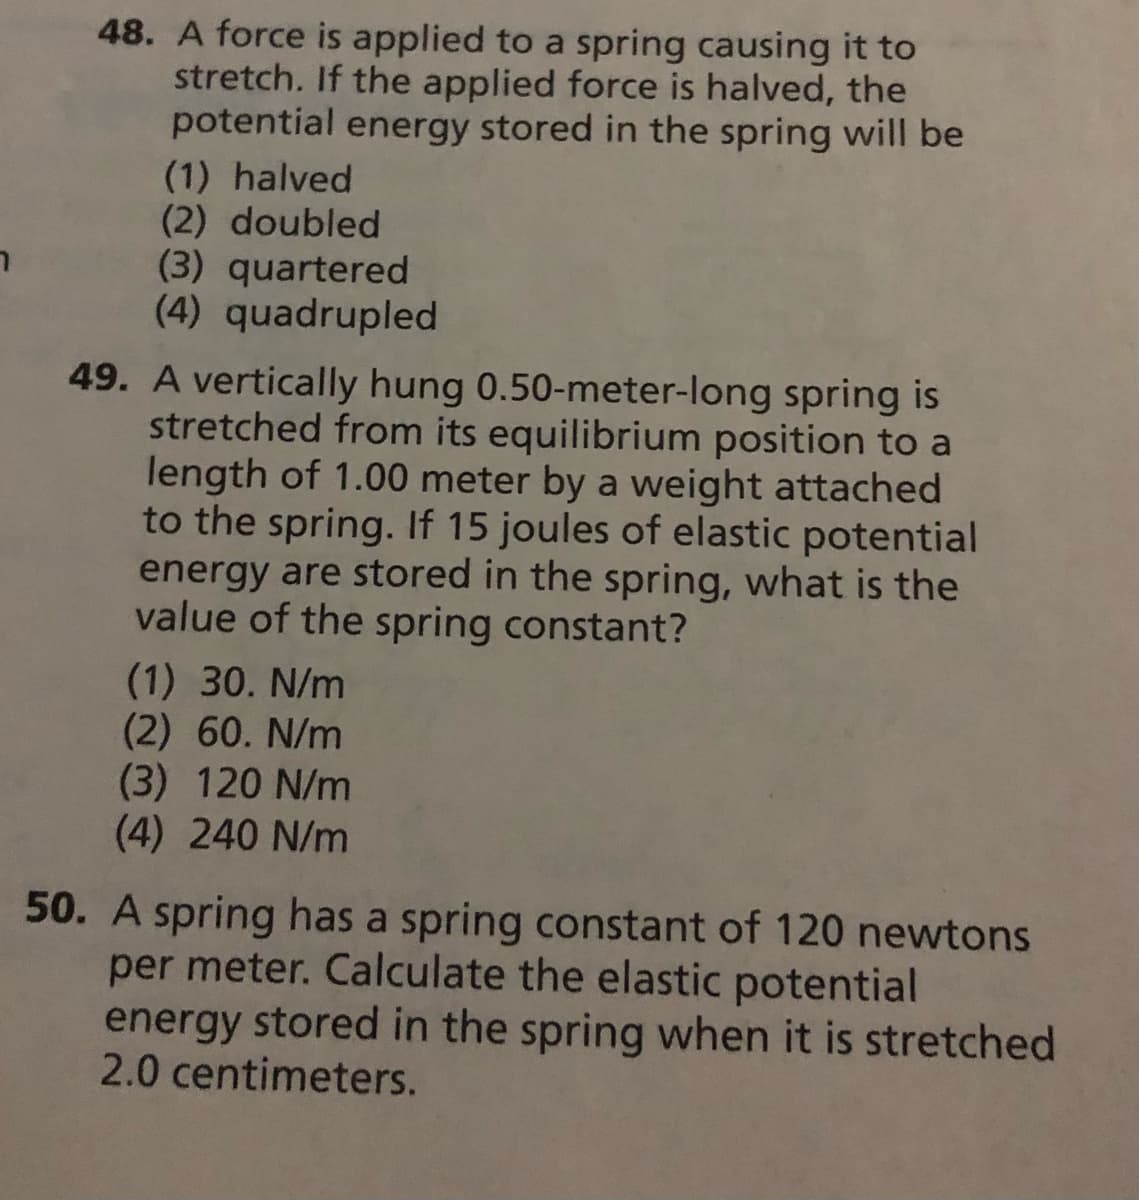 48. A force is applied to a spring causing it to
stretch. If the applied force is halved, the
potential energy stored in the spring will be
(1) halved
(2) doubled
(3) quartered
(4) quadrupled
49. A vertically hung 0.50-meter-long spring is
stretched from its equilibrium position to a
length of 1.00 meter by a weight attached
to the spring. If 15 joules of elastic potential
energy are stored in the spring, what is the
value of the spring constant?
(1) 30. N/m
(2) 60. N/m
(3) 120 N/m
(4) 240 N/m
50. A spring has a spring constant of 120 newtons
per meter. Calculate the elastic potential
energy stored in the spring when it is stretched
2.0 centimeters.
